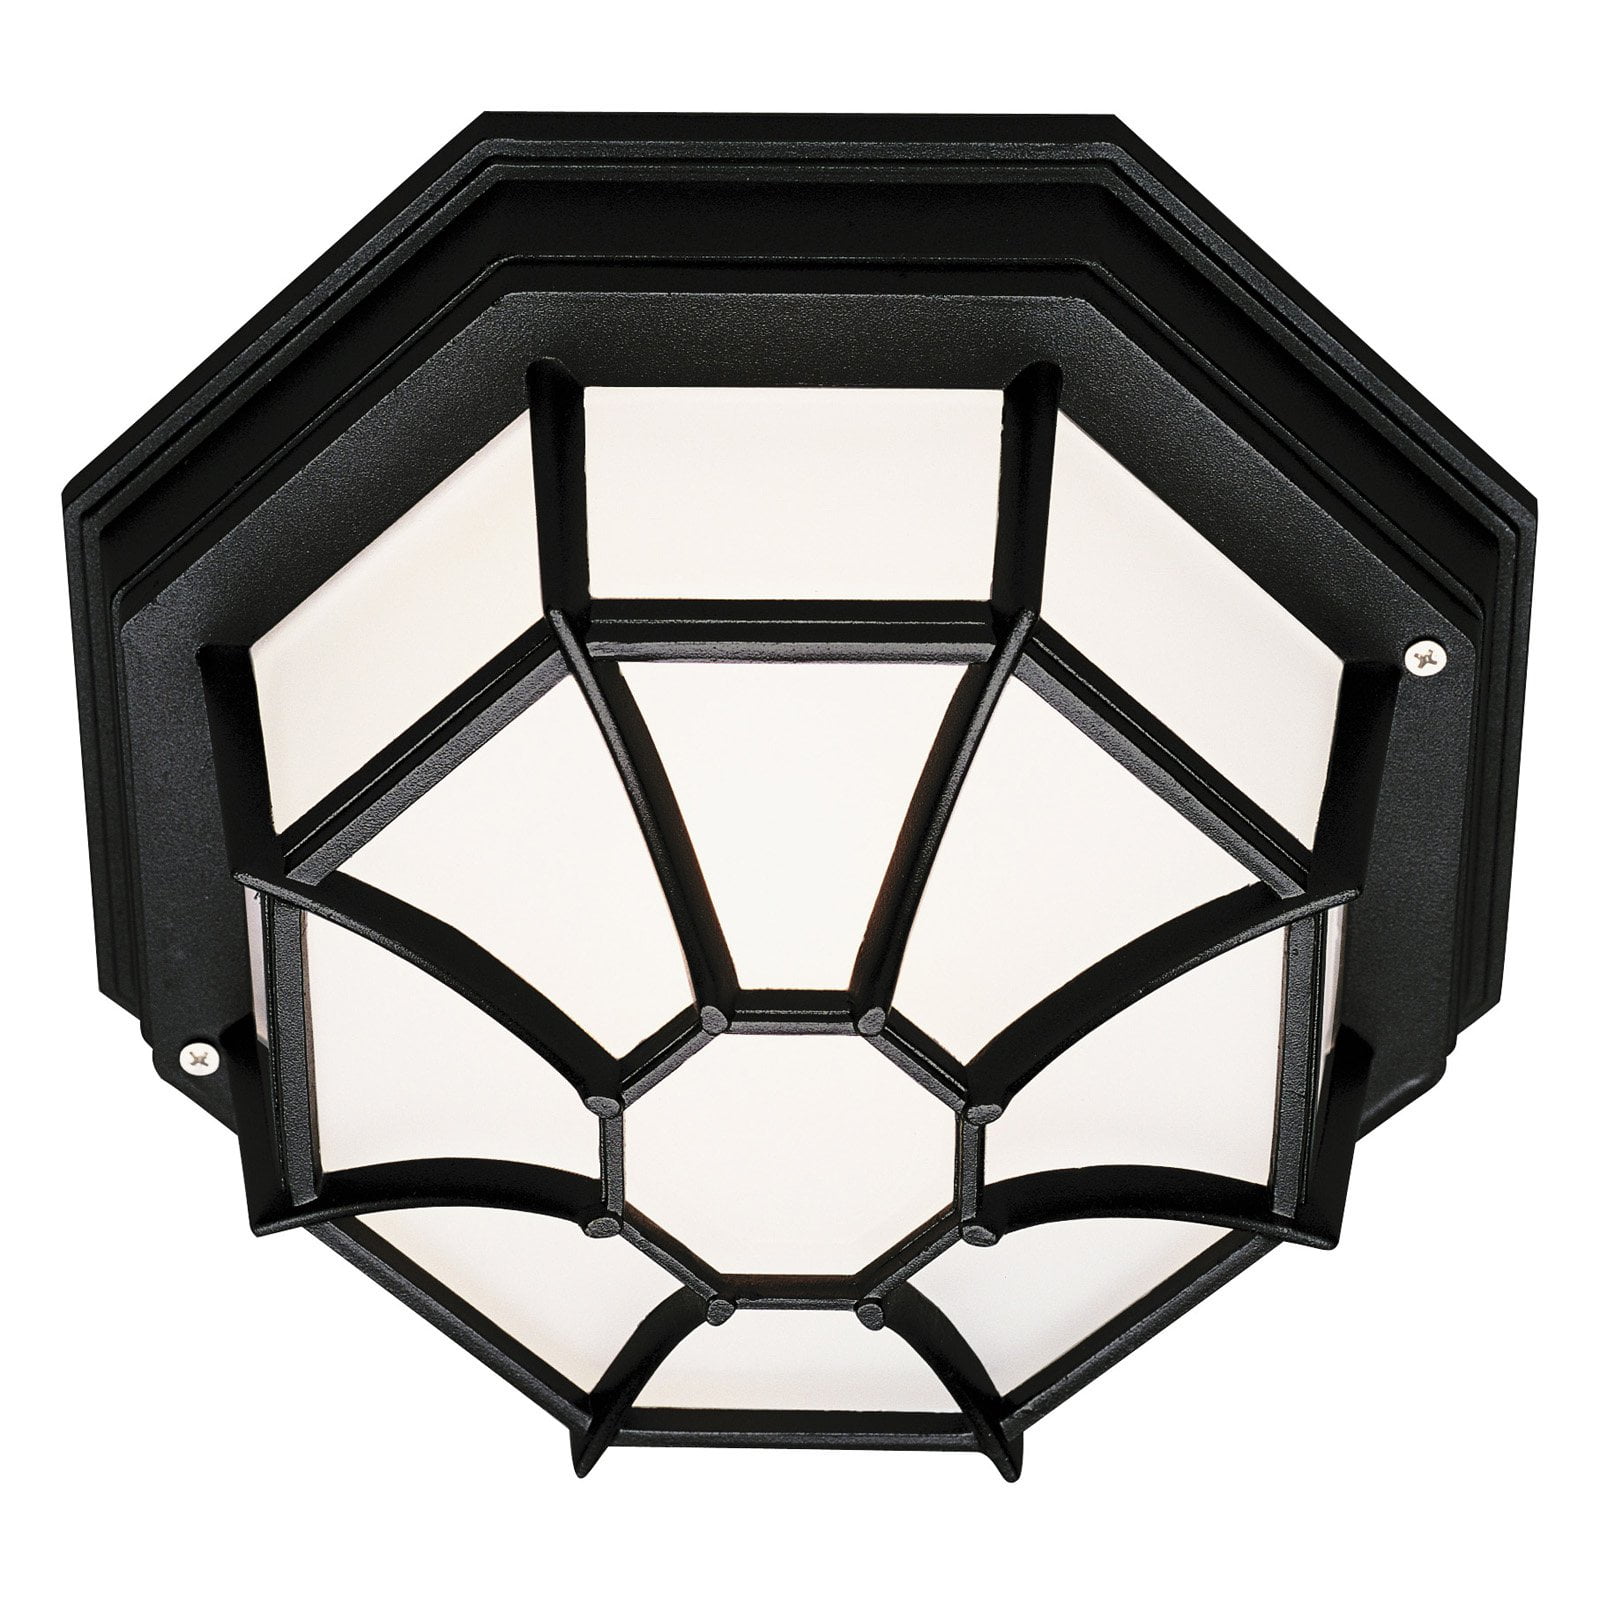 Heath ZENITH 360 Degree Octagonal Motion Activated Decorative Ceiling Light for sale online 